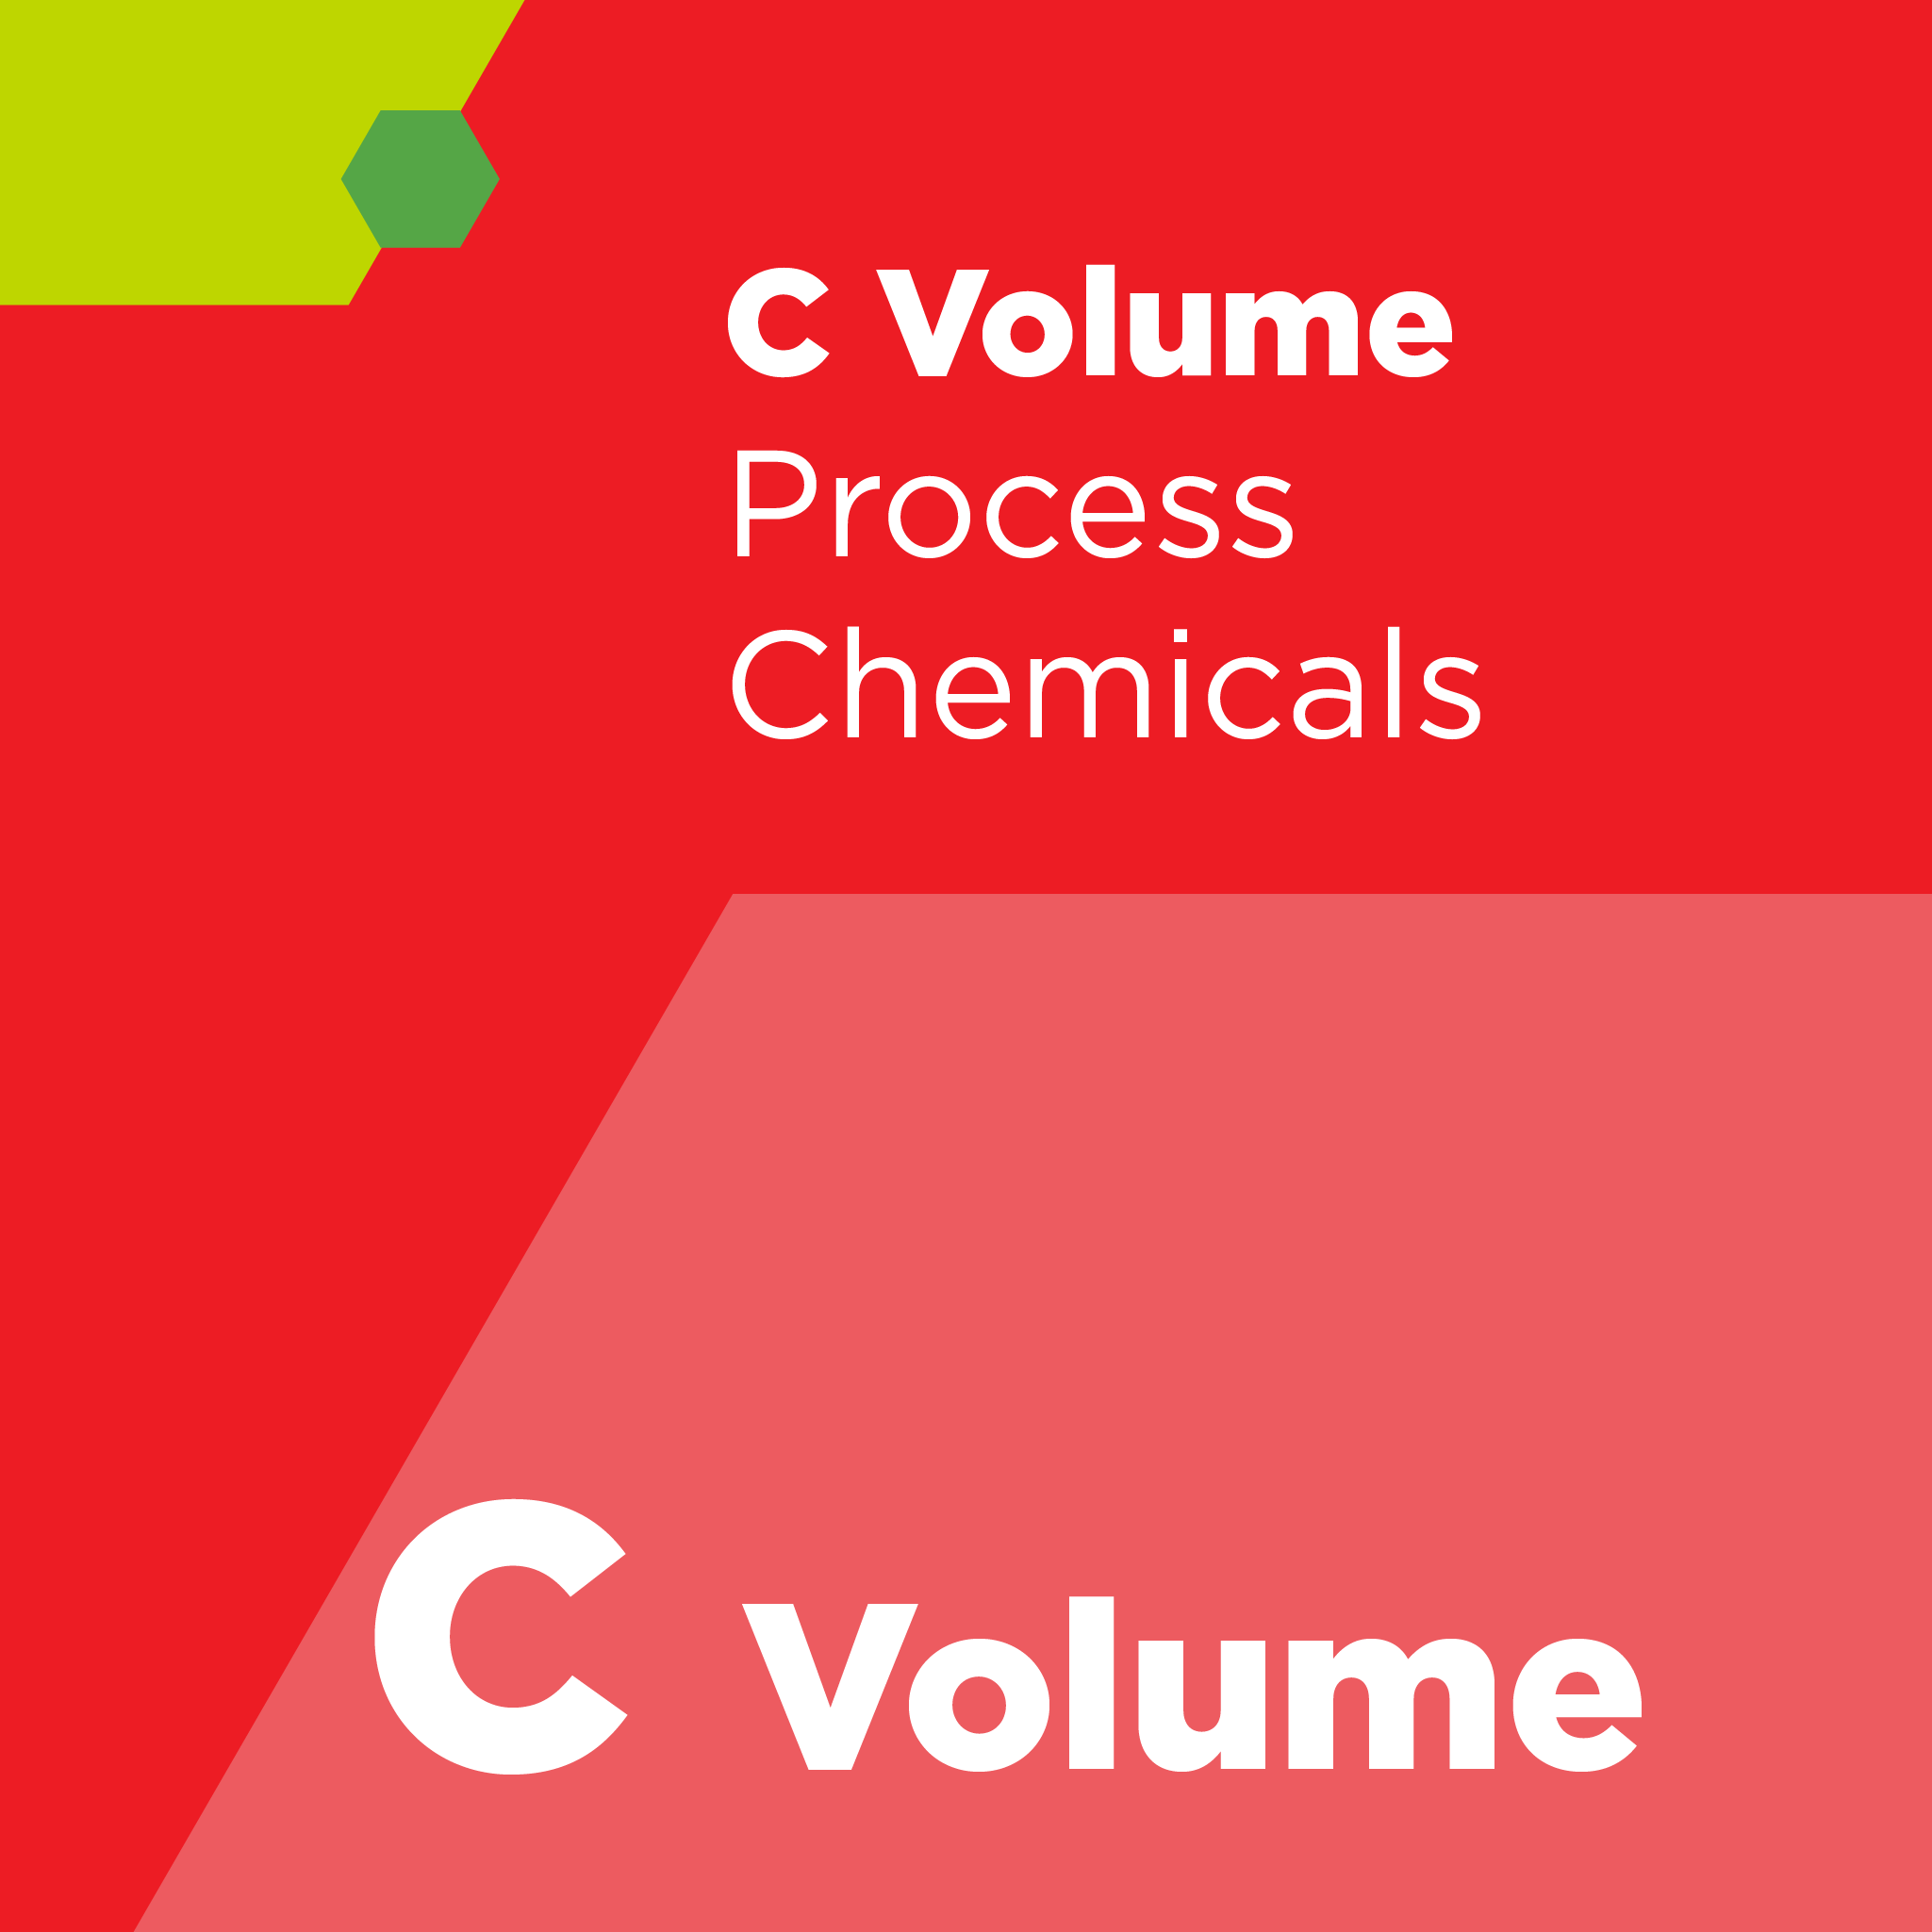 C03000 - SEMI C30 - Specification and Guide for Hydrogen Peroxide